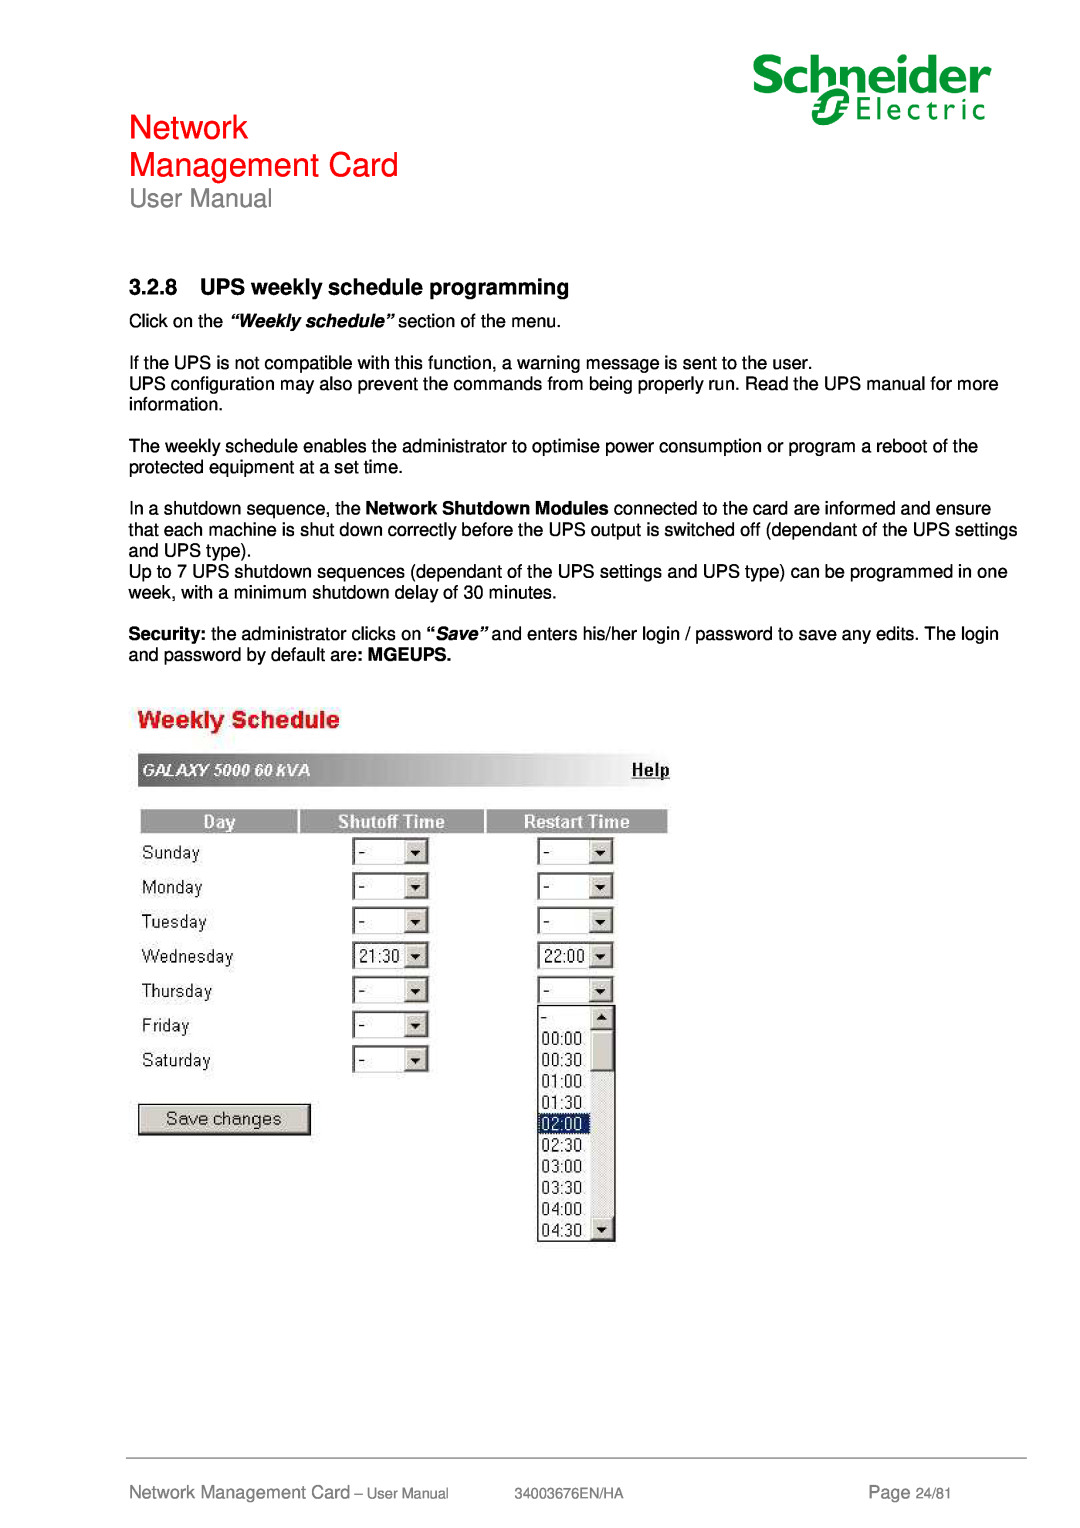 Schneider Electric 66846, 66074 UPS weekly schedule programming, Network Management Card, User Manual, Page 24/81 